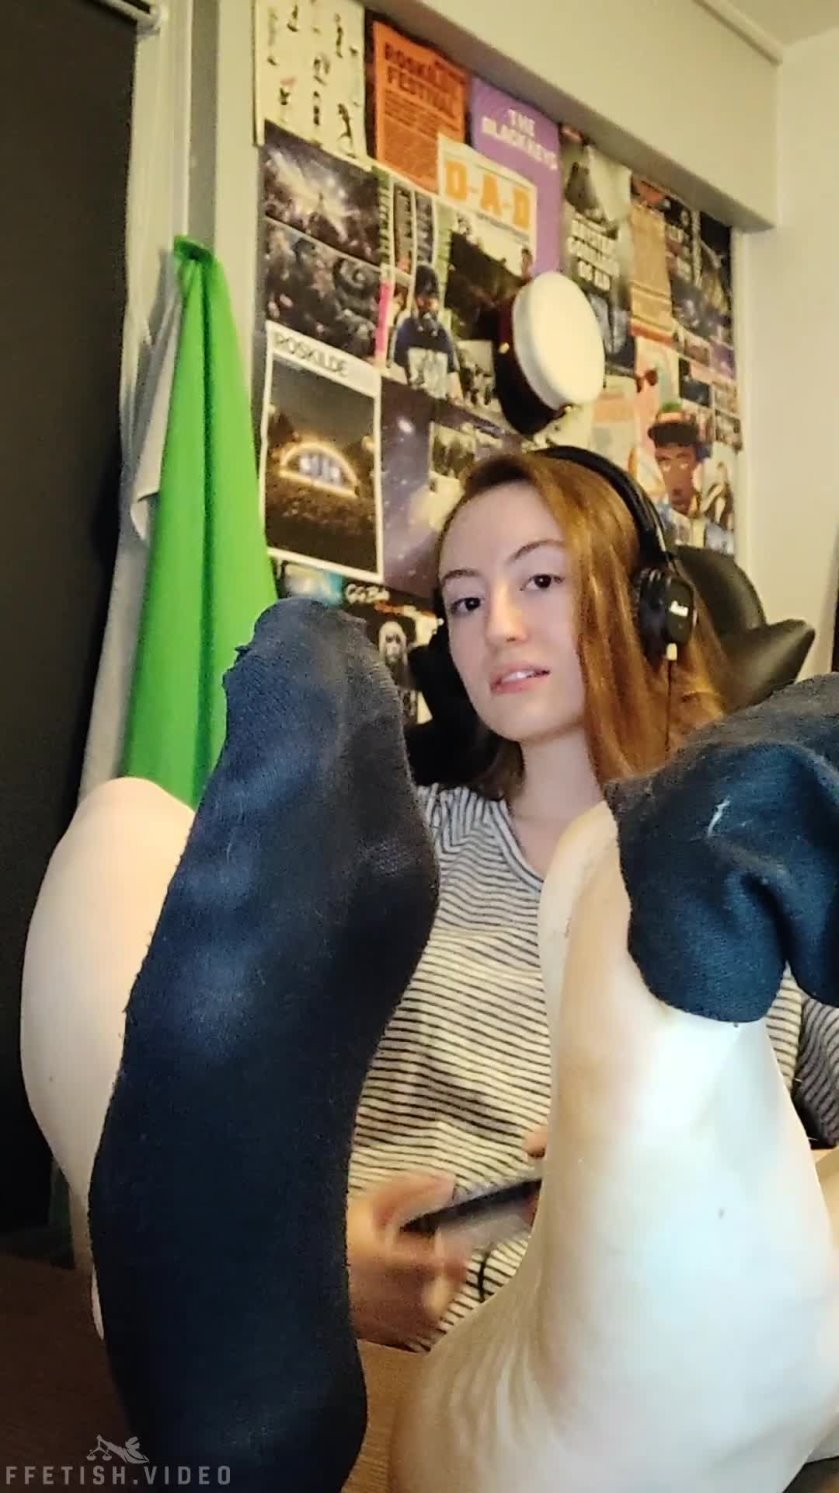 Noodle reccomend thigh high socks smother while gaming